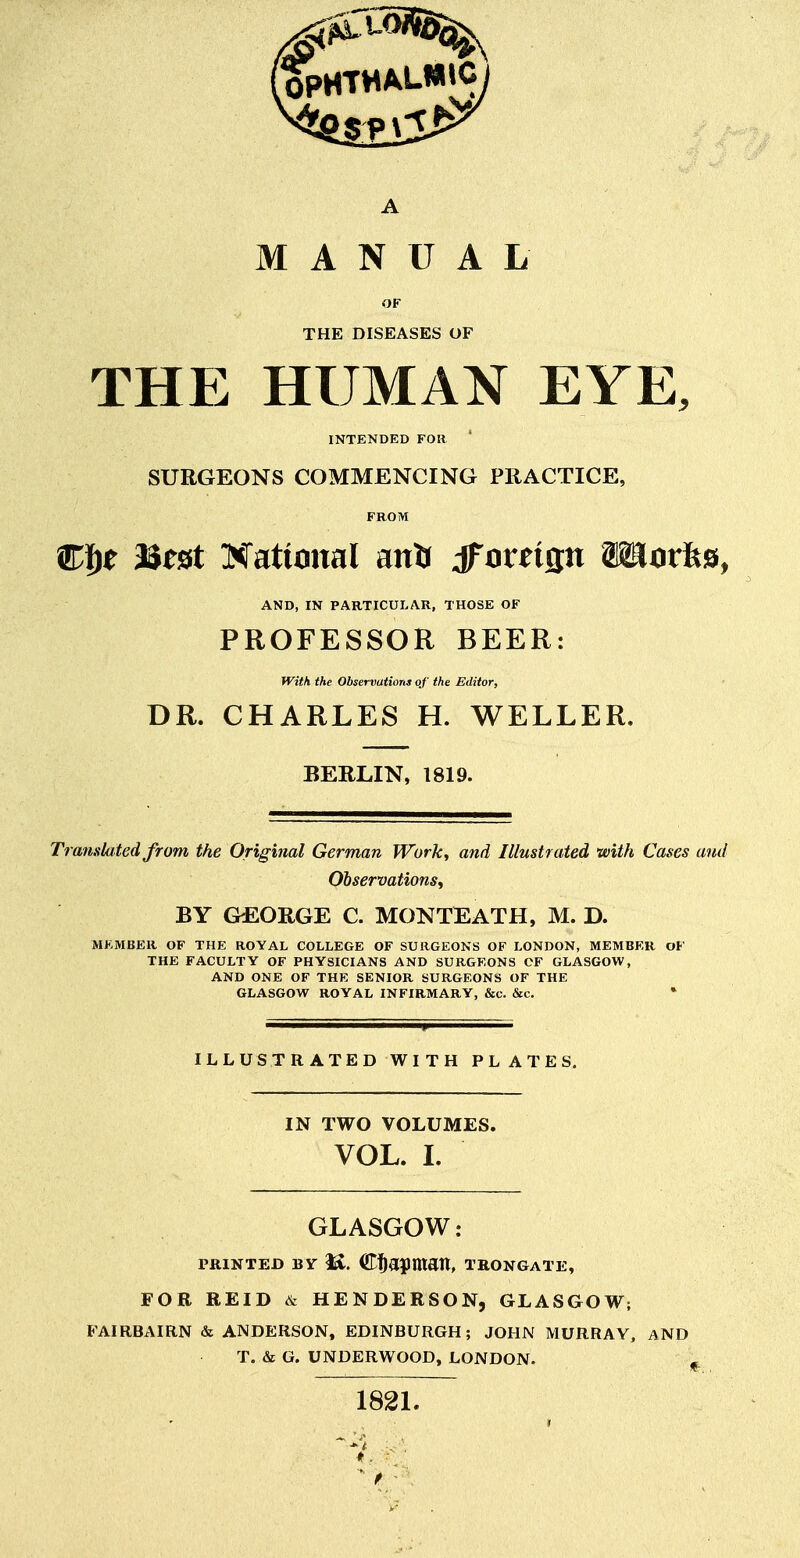 A MANUAL OF THE DISEASES OF THE HUMAN EYE, INTENDED FOR SURGEONS COMMENCING PRACTICE, FROM Wf^t Best Hational anfi dfouifln Wurfes, AND, IN PARTICULAR, THOSE OF PROFESSOR BEER: With the Observations of the Editor, DR. CHARLES H. WELLER. BERLIN, 1819. Translated from the Original German Work^ and Illustrated with Cases and Observations^ BY &EORGE C. MONTEATH, M. D. MKMBER OF THE ROYAL COLLEGE OF SURGEONS OF LONDON, MEMBER OF THE FACULTY OF PHYSICIANS AND SURGEONS CF GLASGOW, AND ONE OF THE SENIOR SURGEONS OF THE GLASGOW ROYAL INFIRMARY, &c. &c. * ILLUSTRATED WITH PLATES. IN TWO VOLUMES. VOL. L GLASGOW: PRINTED BY <K. Ci^apmatt, TRONGATE, FOR REID & HENDERSON, GLASGOW; FAIRBAIRN & ANDERSON, EDINBURGH; JOHN MURRAY, AND T. & G. UNDERWOOD, LONDON. , 182L